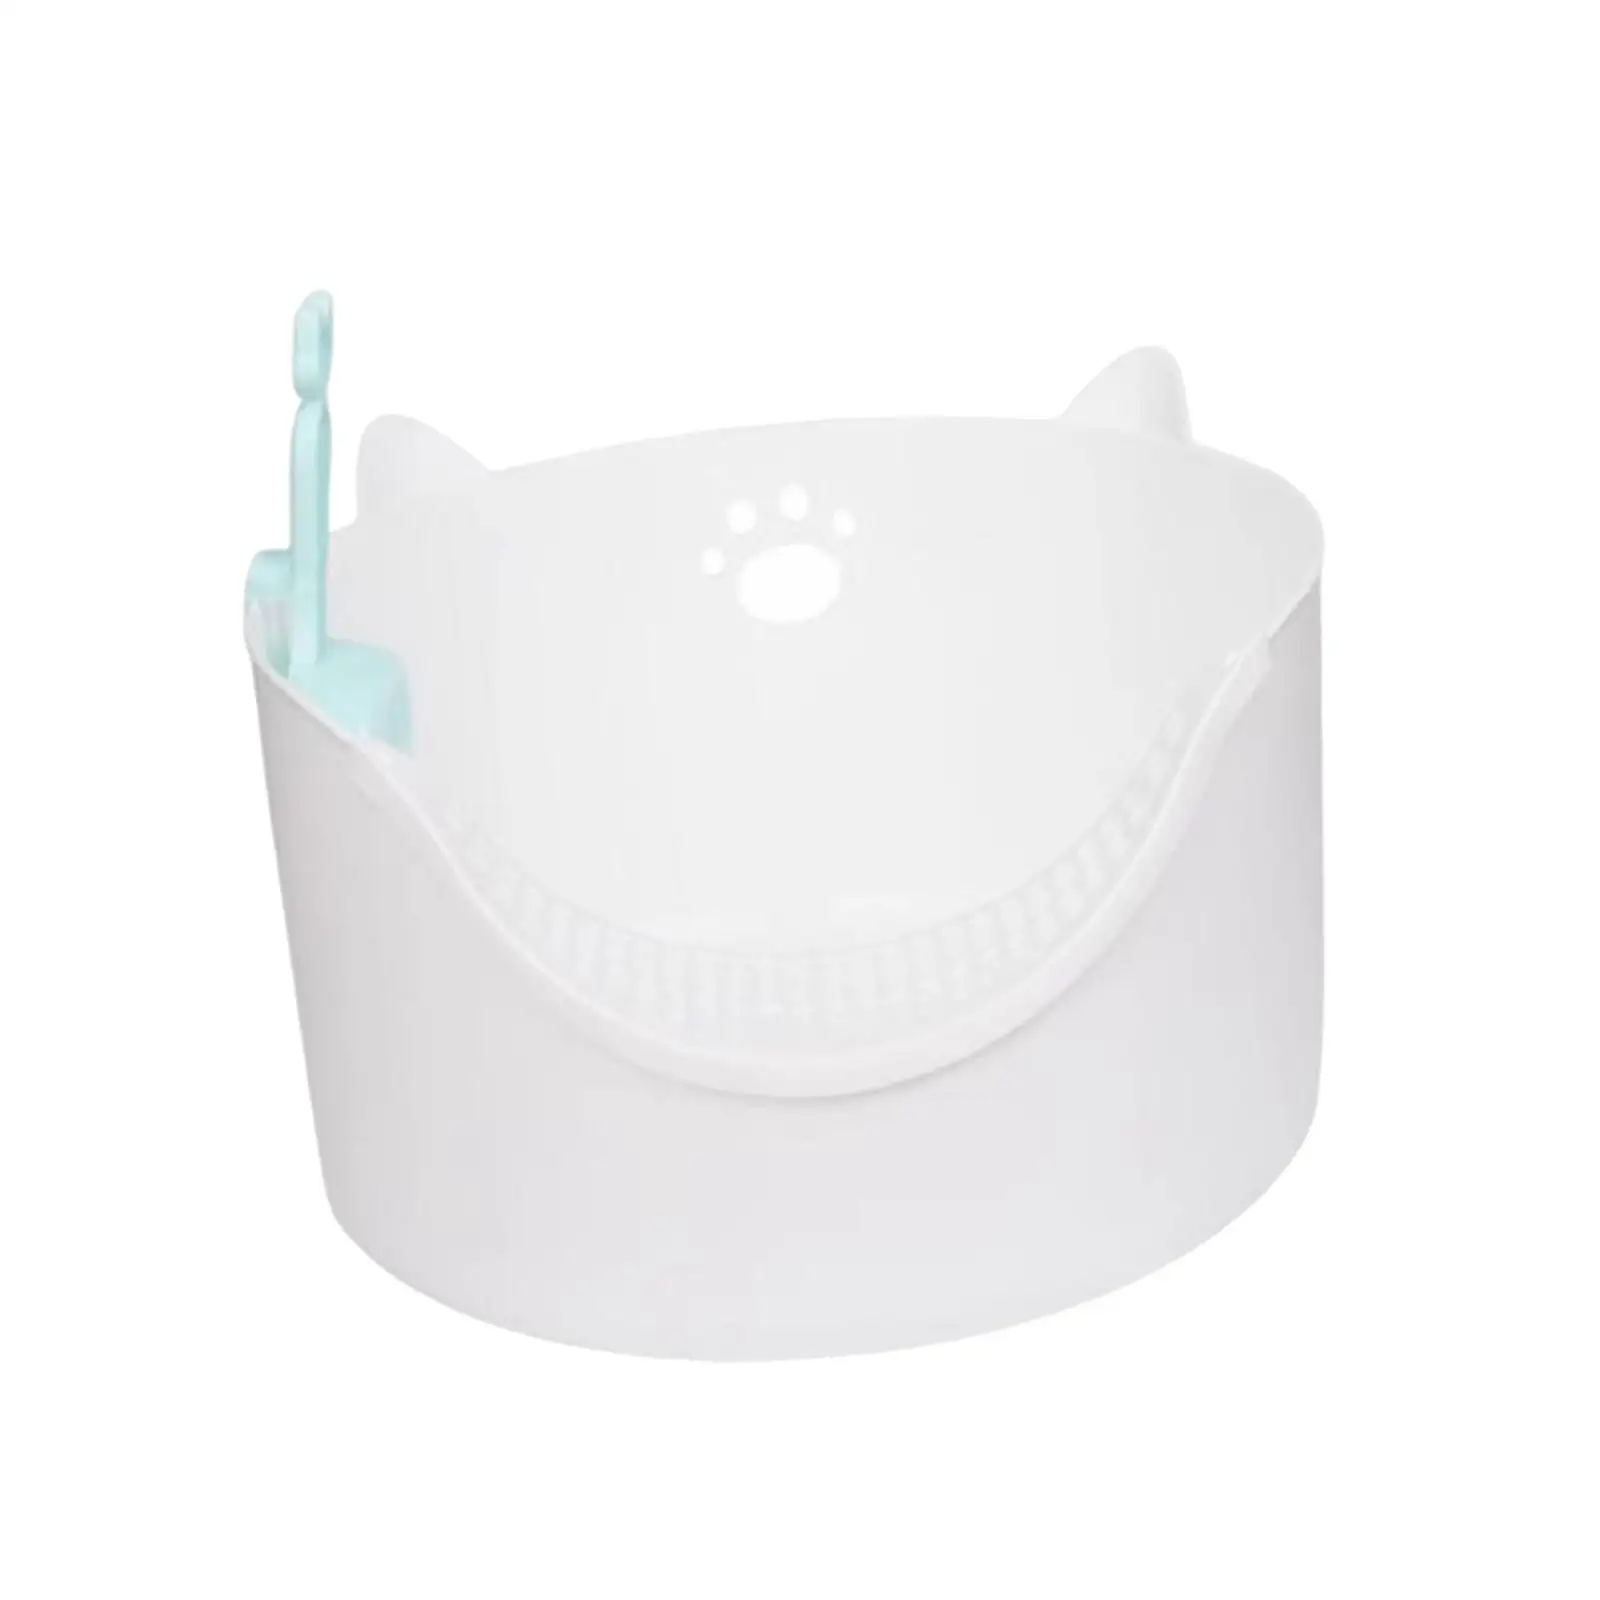 Cat Litter Box with Scooper Cage Easy to Clean Potty Toilet Bedpan for Small and Medium Cats Kitty Rabbit Bunny Small Animals